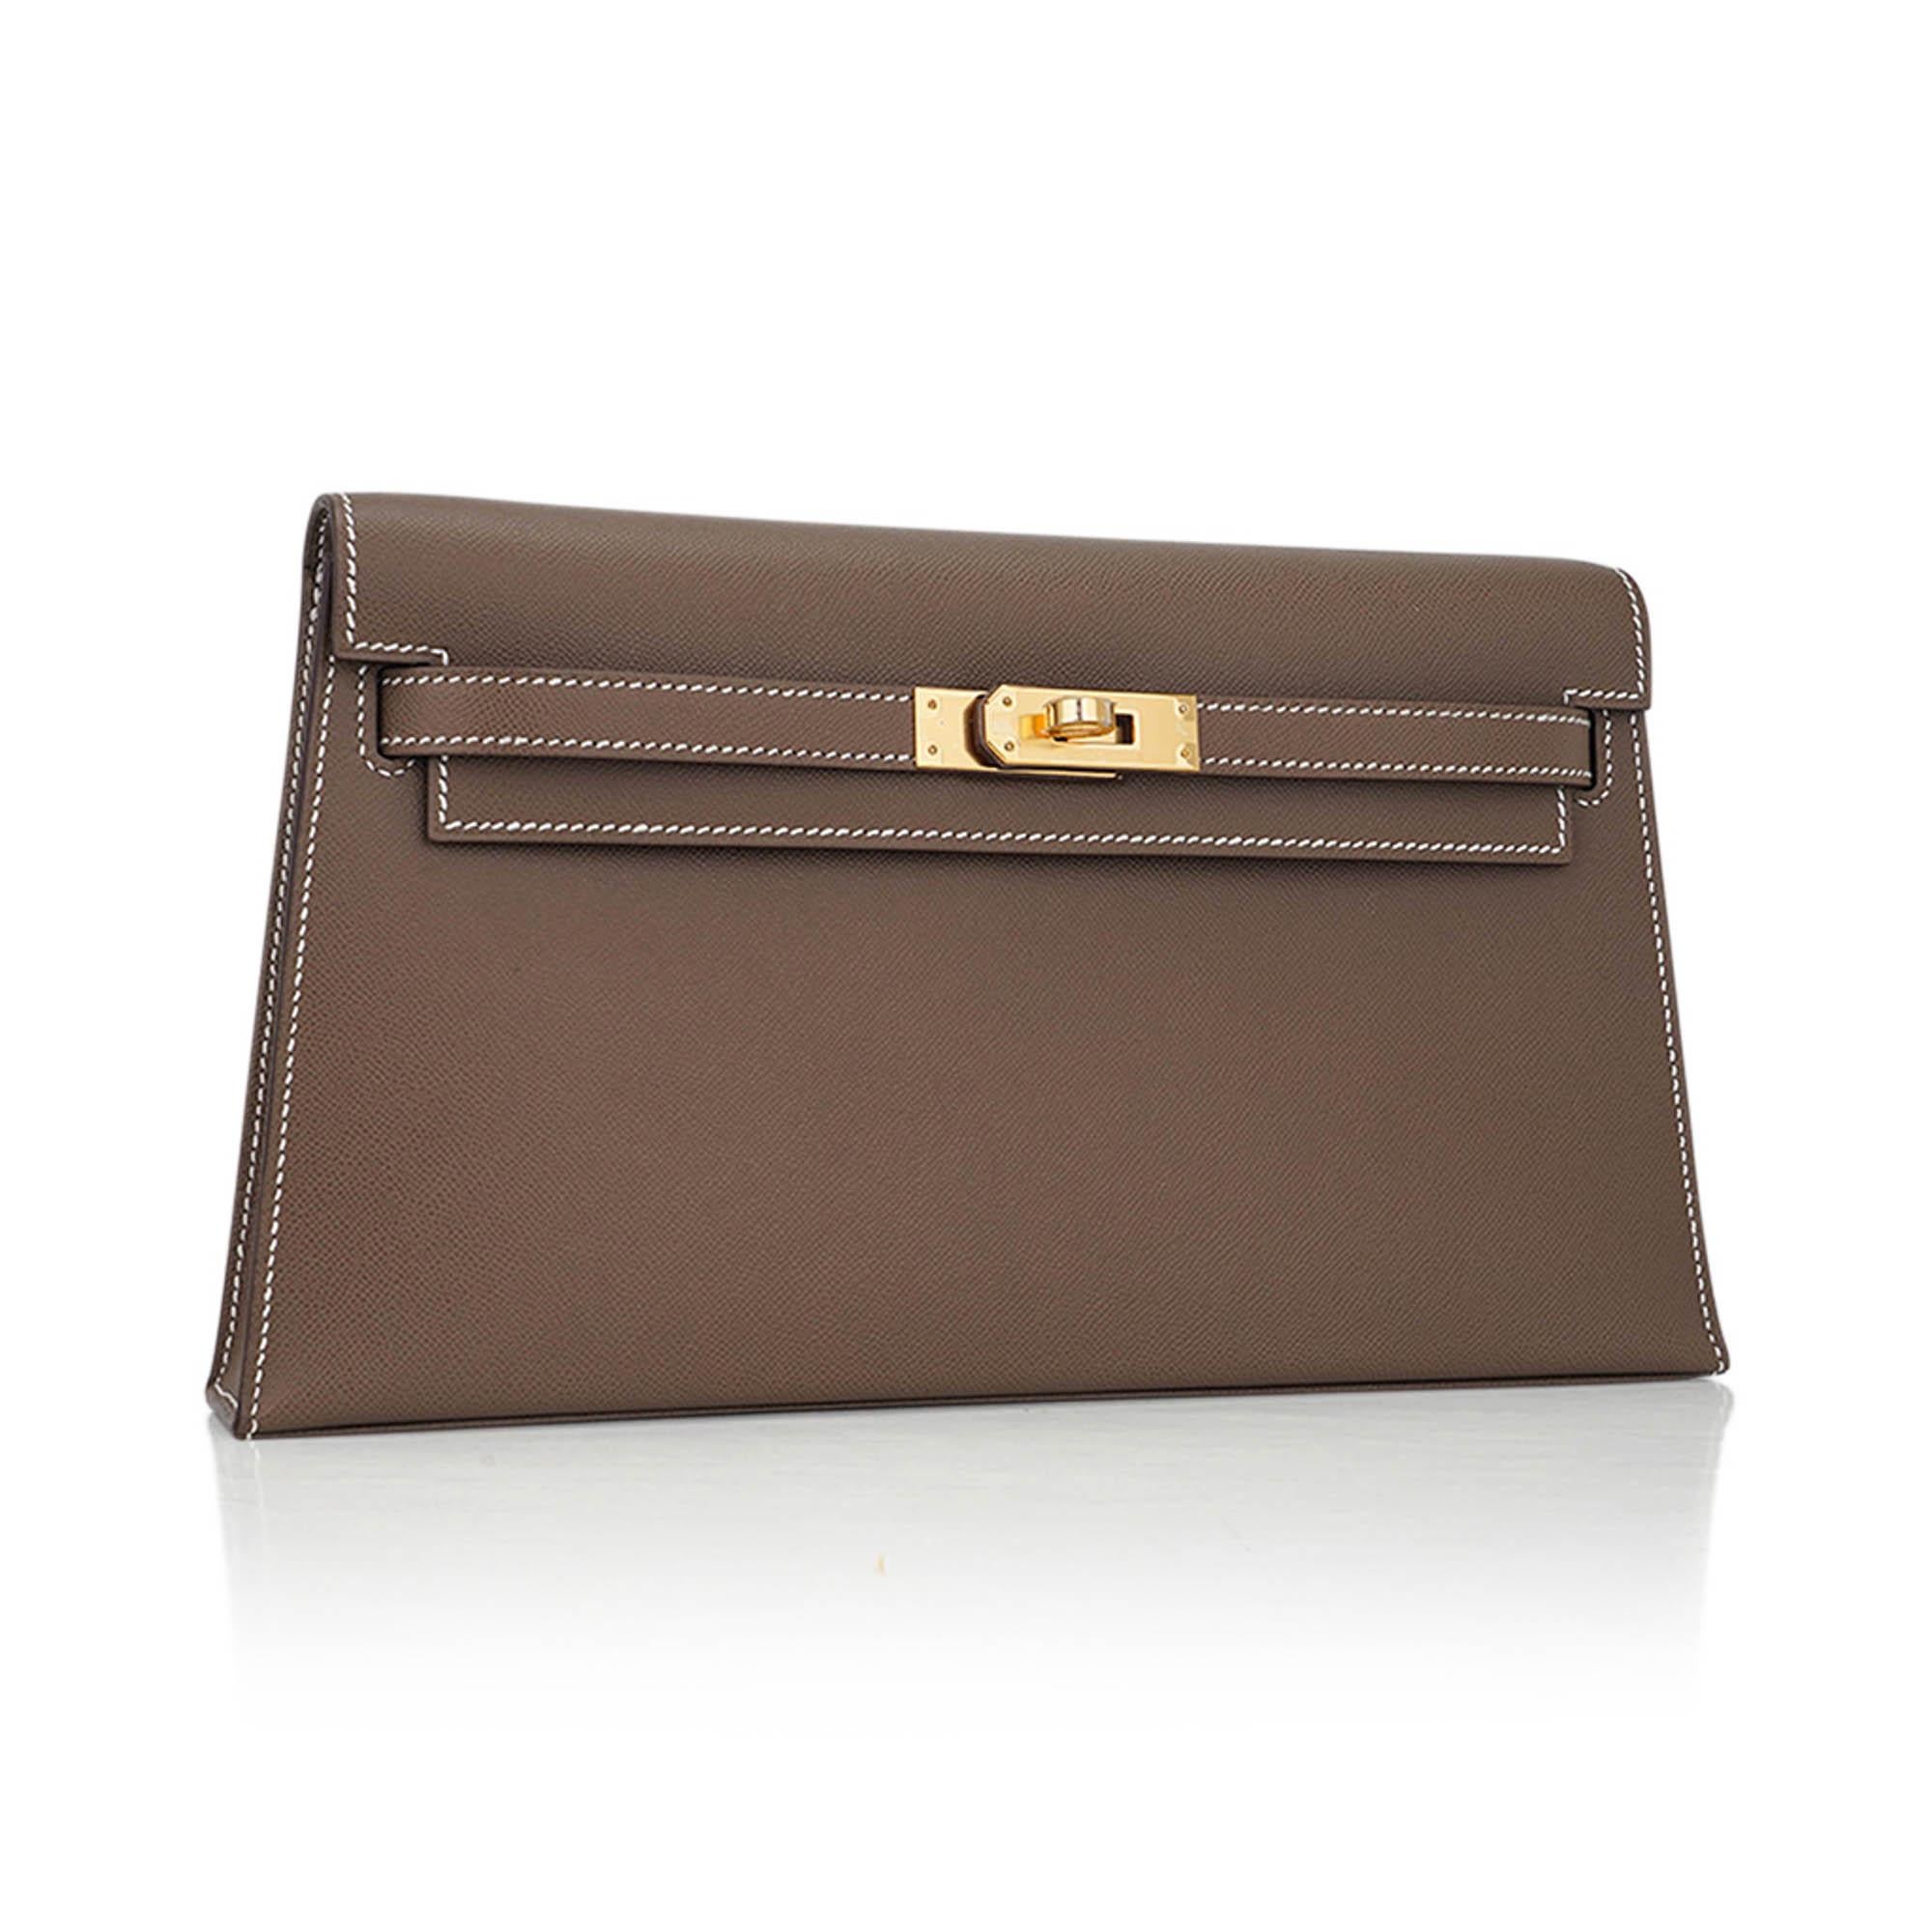 Mightychic offers an Hermes Kelly Elan featured in Etoupe.
Re-released this past Spring, the Kelly Elan was first introduced in 2000 and produced through 2002.
Removable shoulder strap easily converts this elegant shoulder bag into a